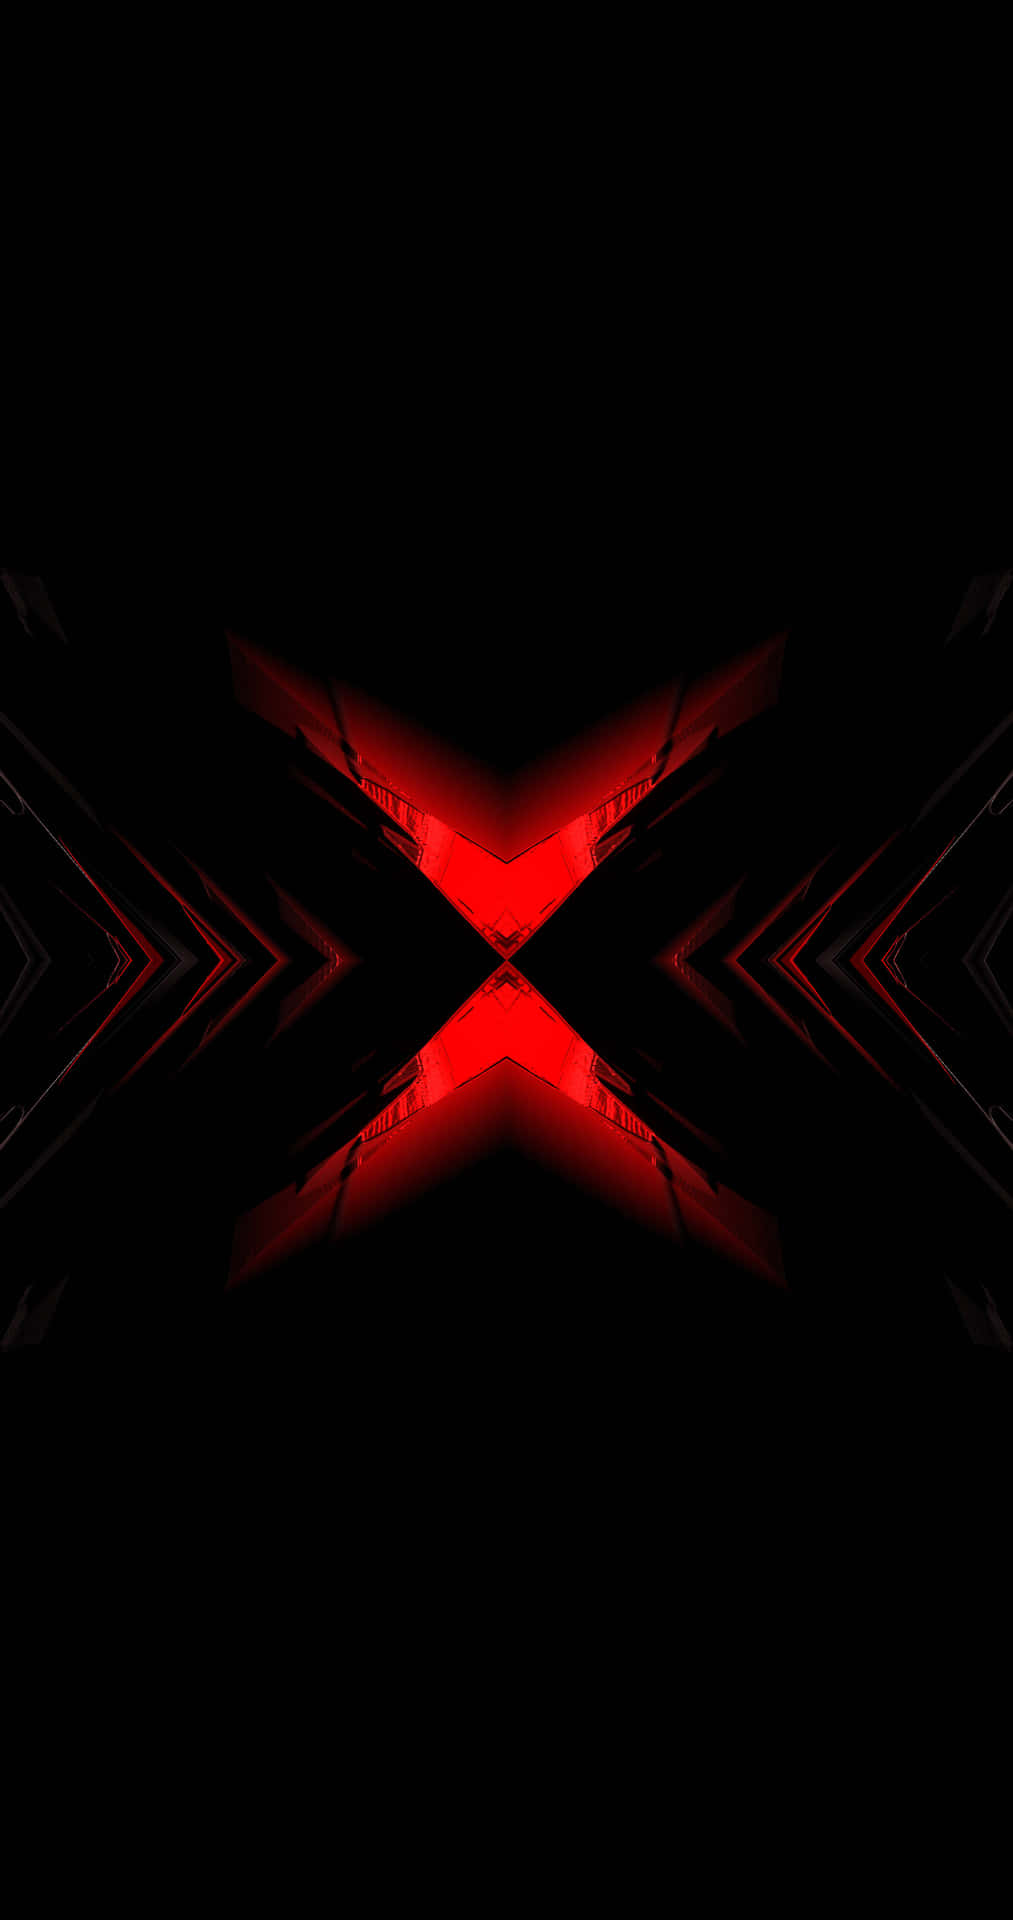 Radiance&Reflection - Black Red Neon Wallpaper